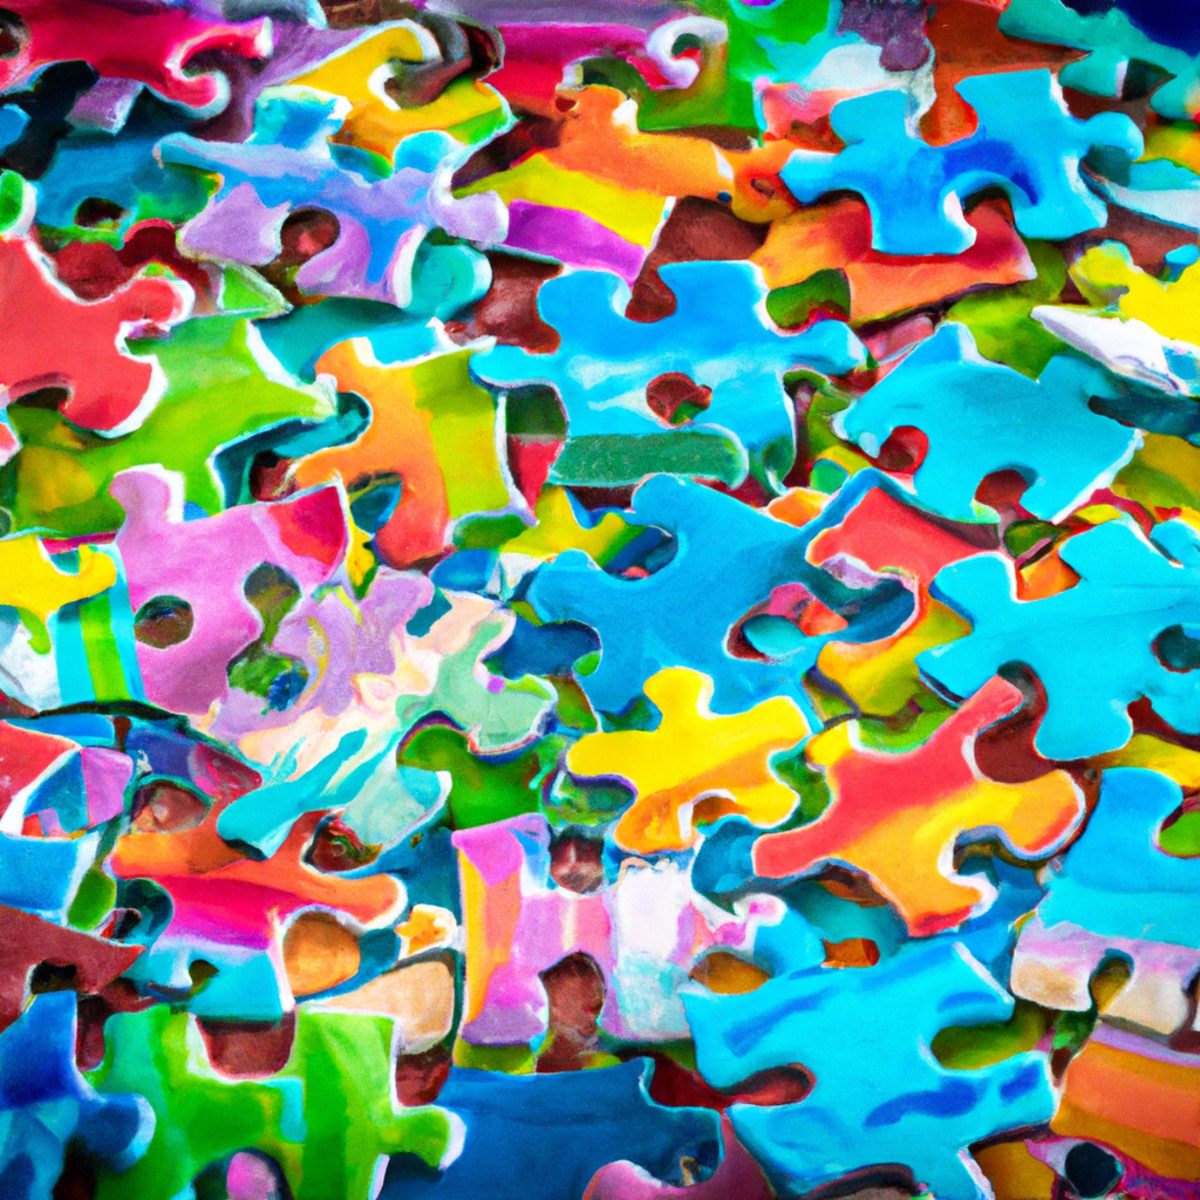 Colorful puzzle pieces representing the emotional challenges of Mucopolysaccharidoses, emphasizing resilience and support.